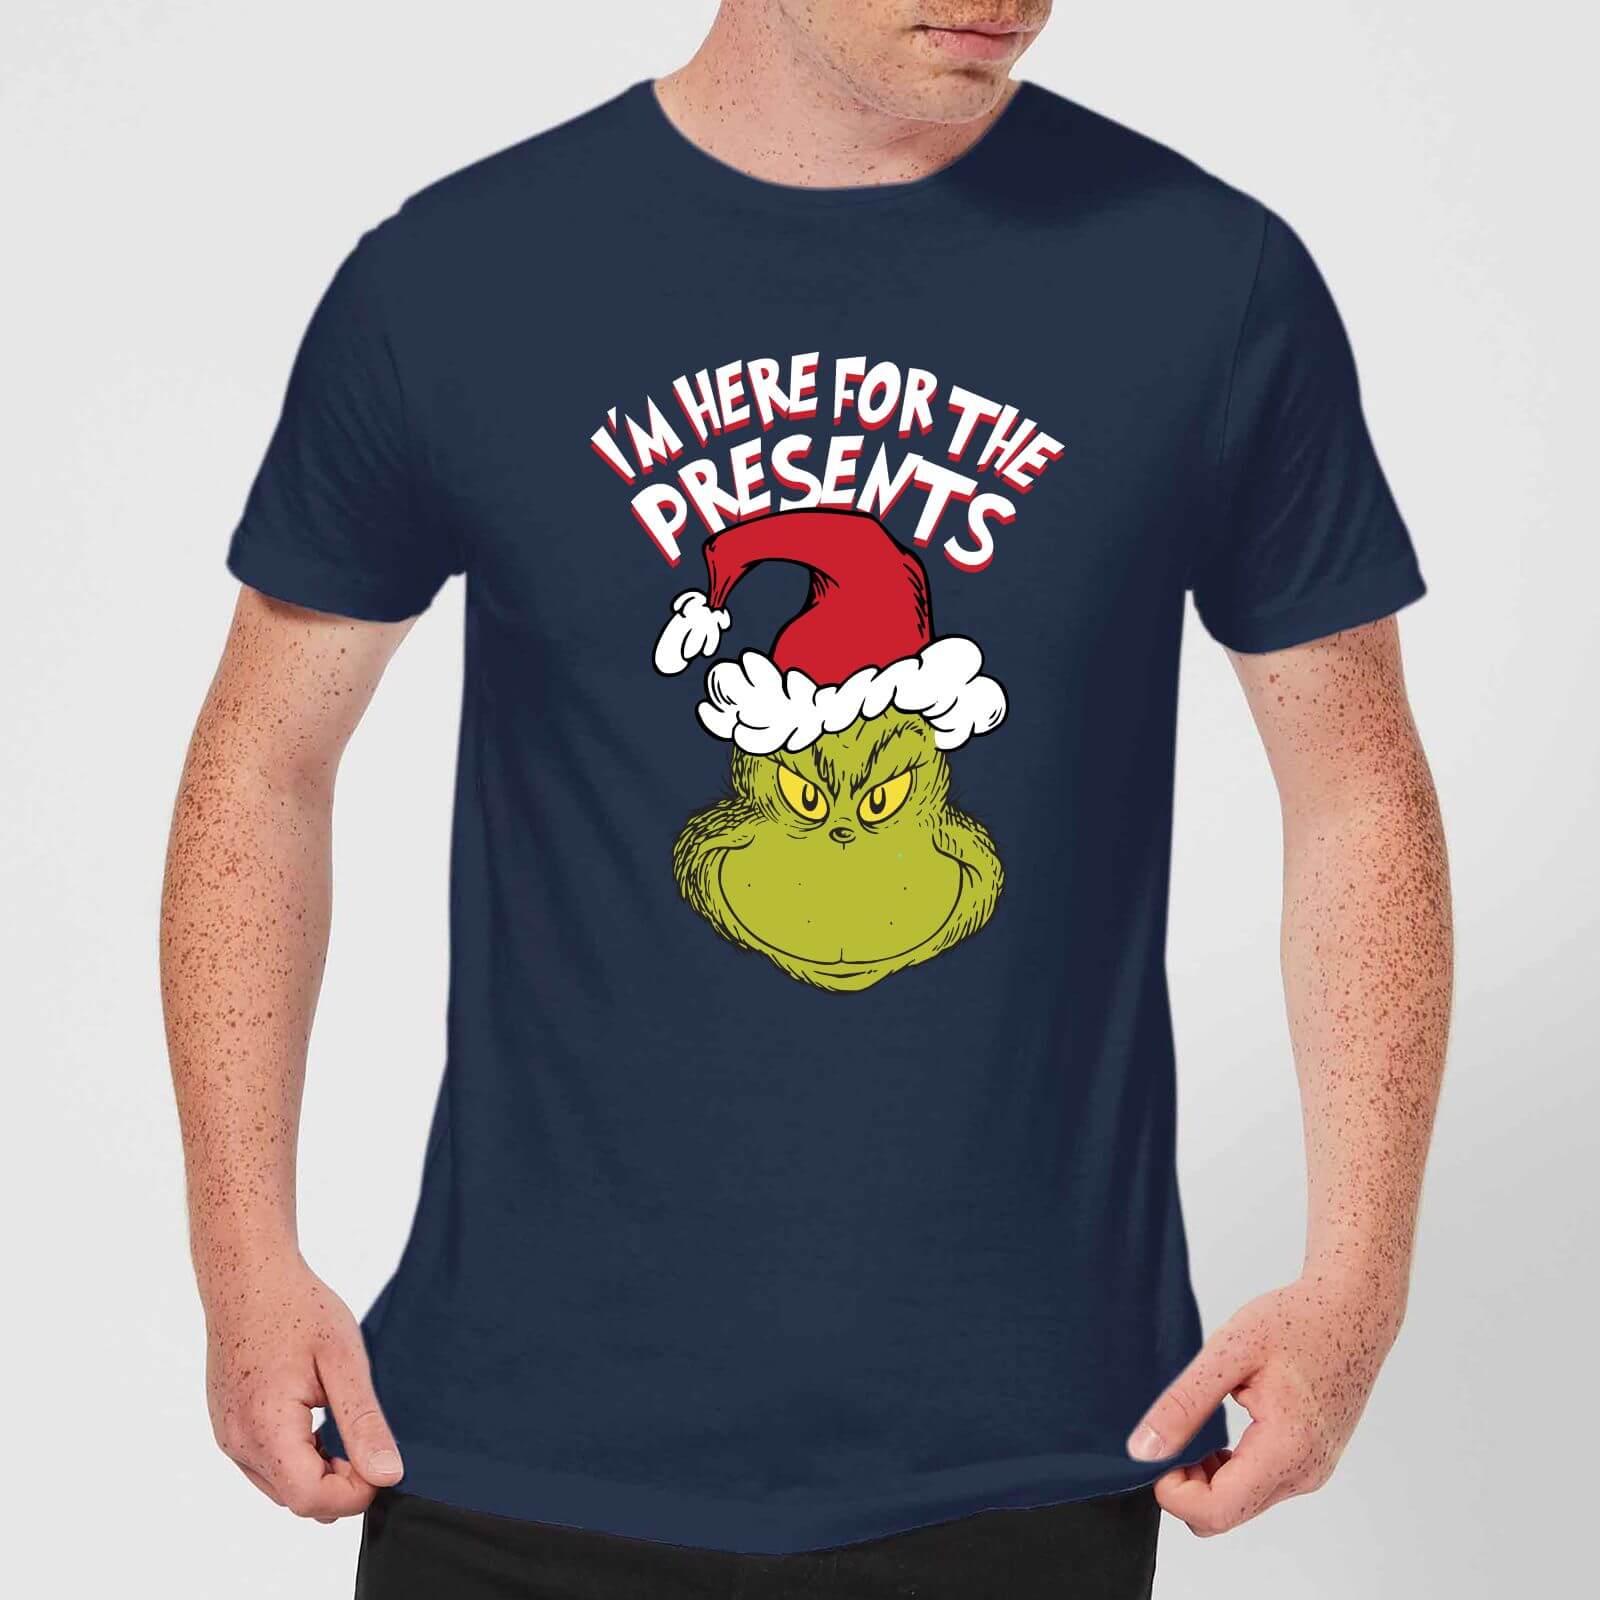 The Grinch Im Here for The Presents Men's Christmas T-Shirt - Navy - M